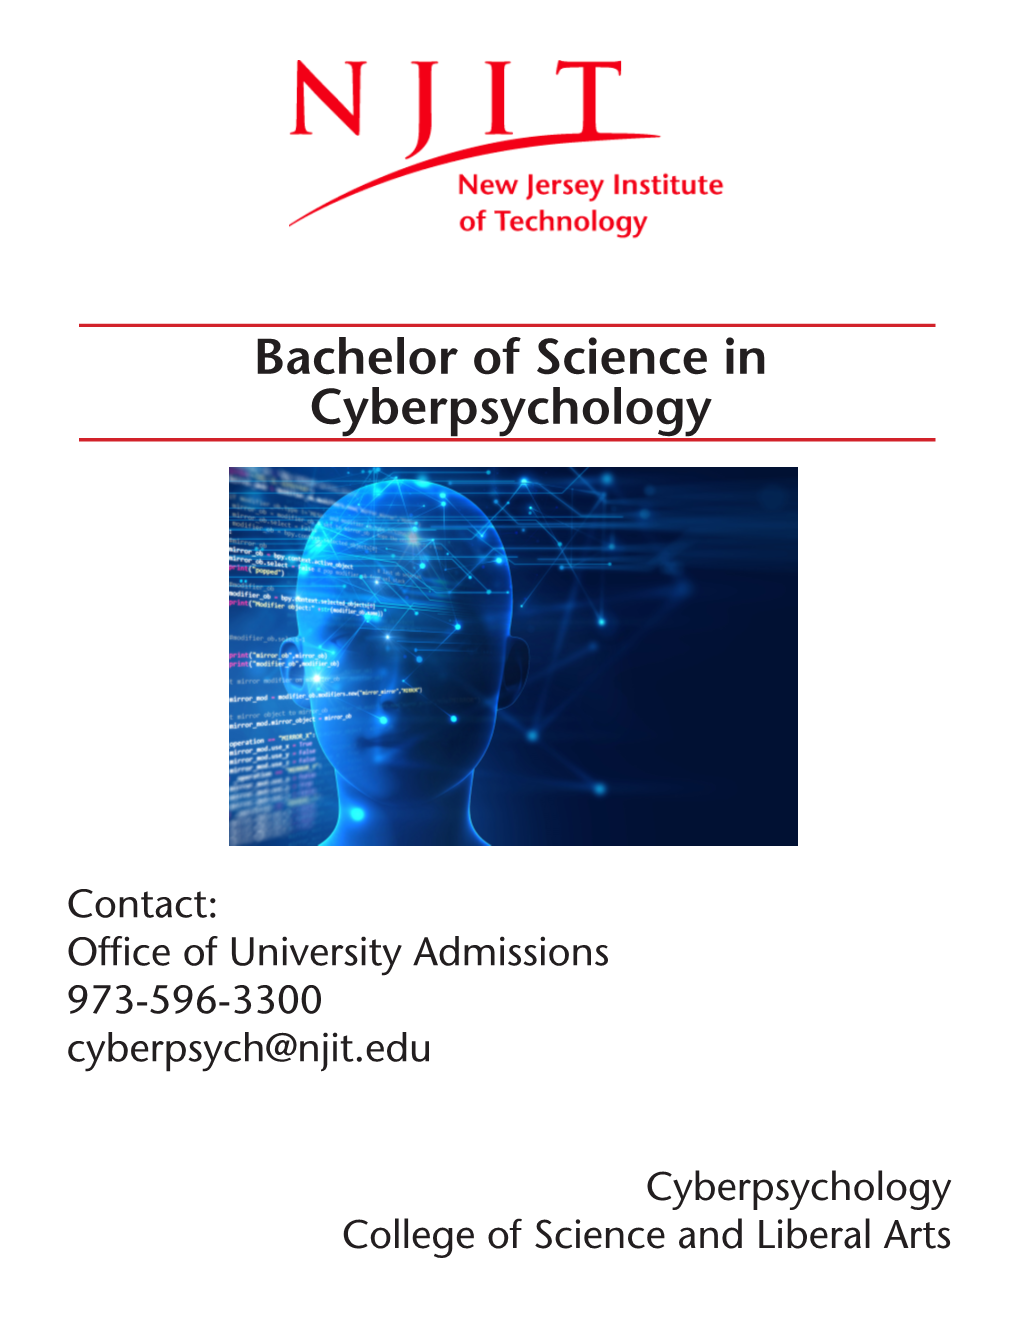 Bachelor of Science in Cyberpsychology